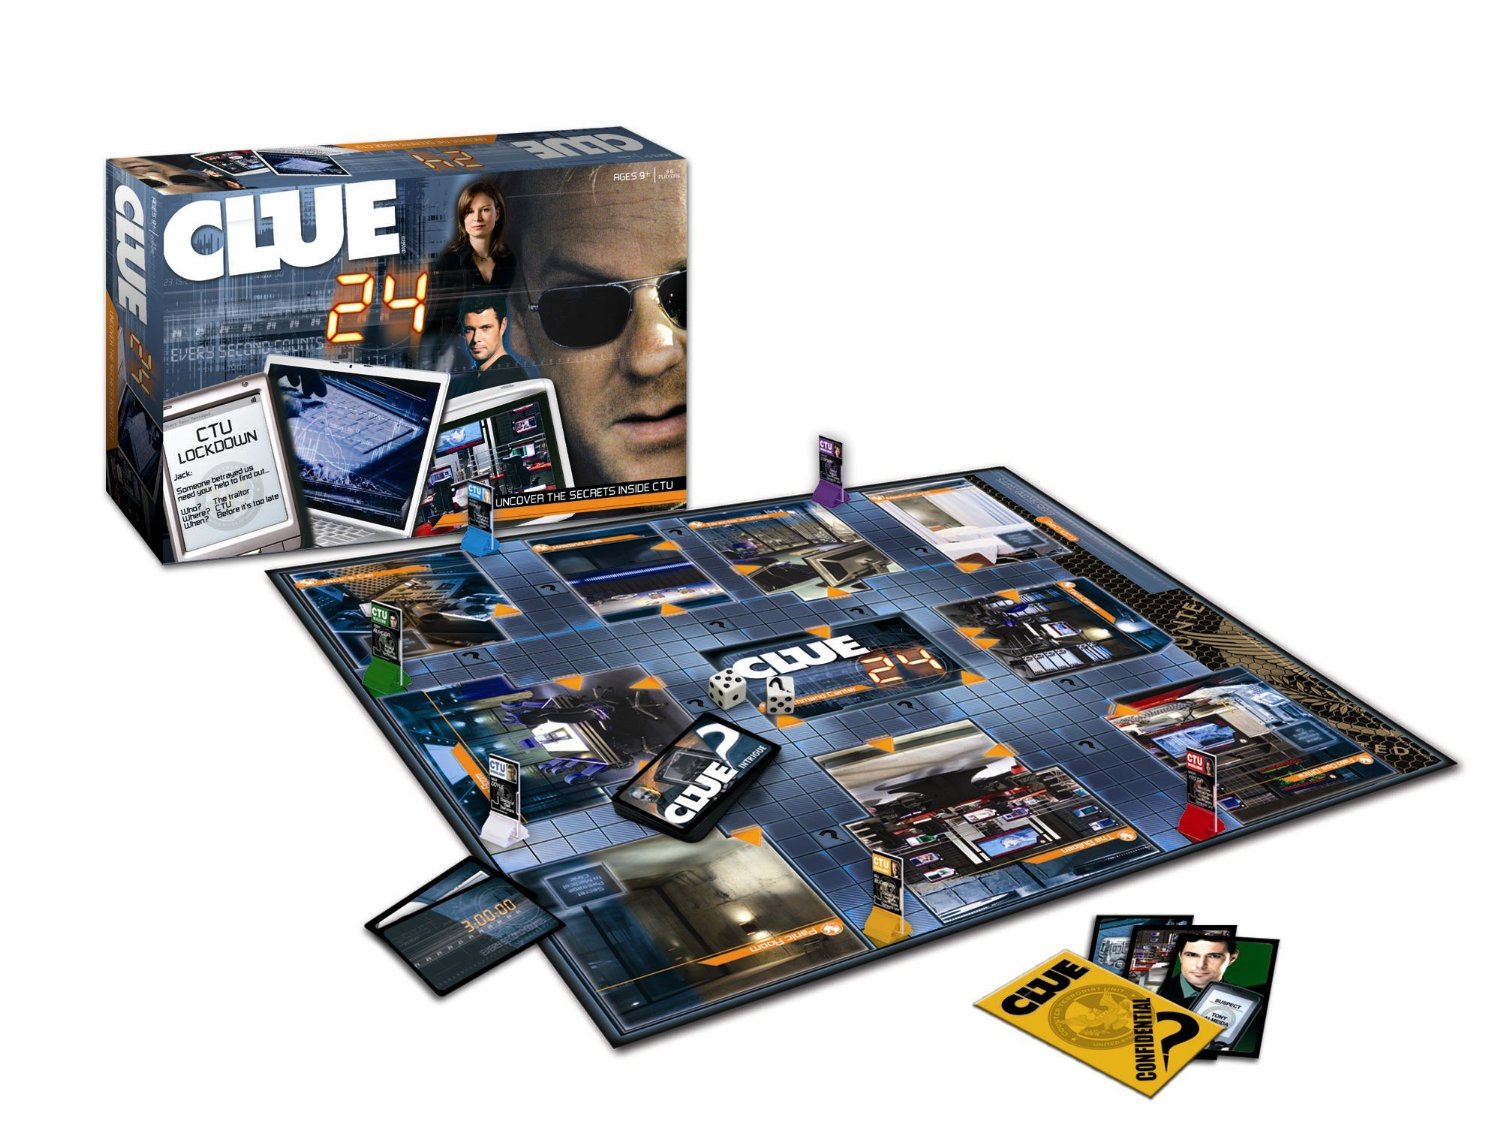 2006 -24 the DVD Board game / 2007 -24 Trading Card Game / 2009 -Clue 24 -  Kiefer Sutherland Filmographie